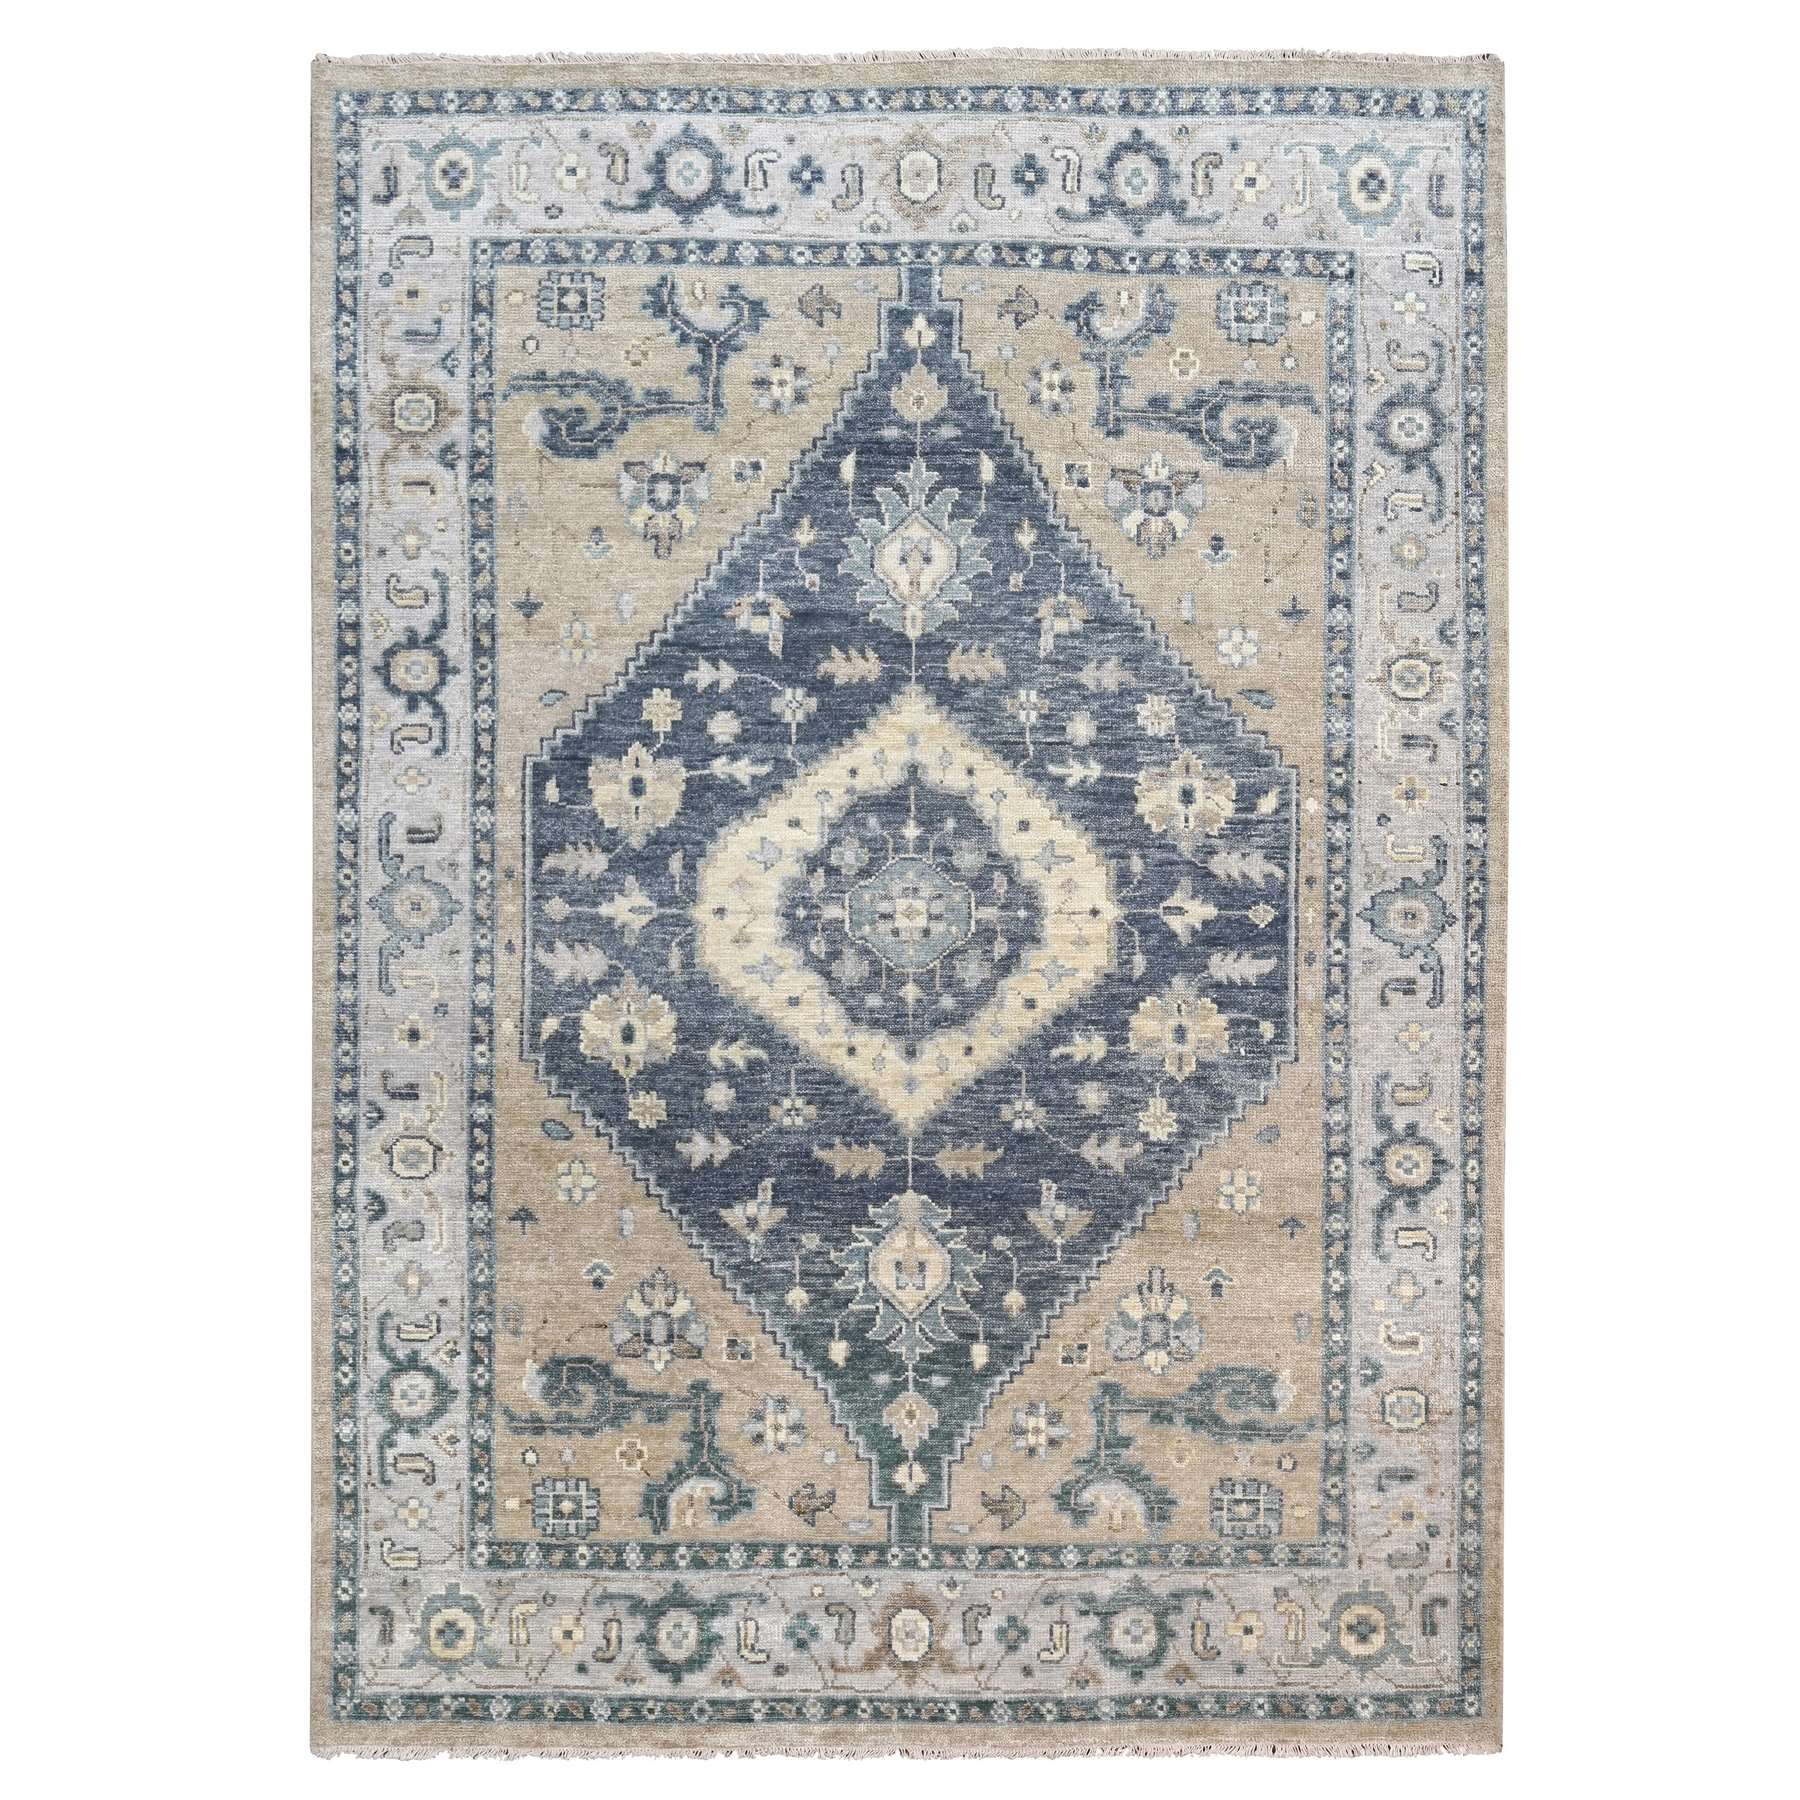 Toasty Gray, Hand Knotted Tone On Tone, Bakshaish Design, Pure and Velvety Wool, Supple Collection, Oriental Rug 